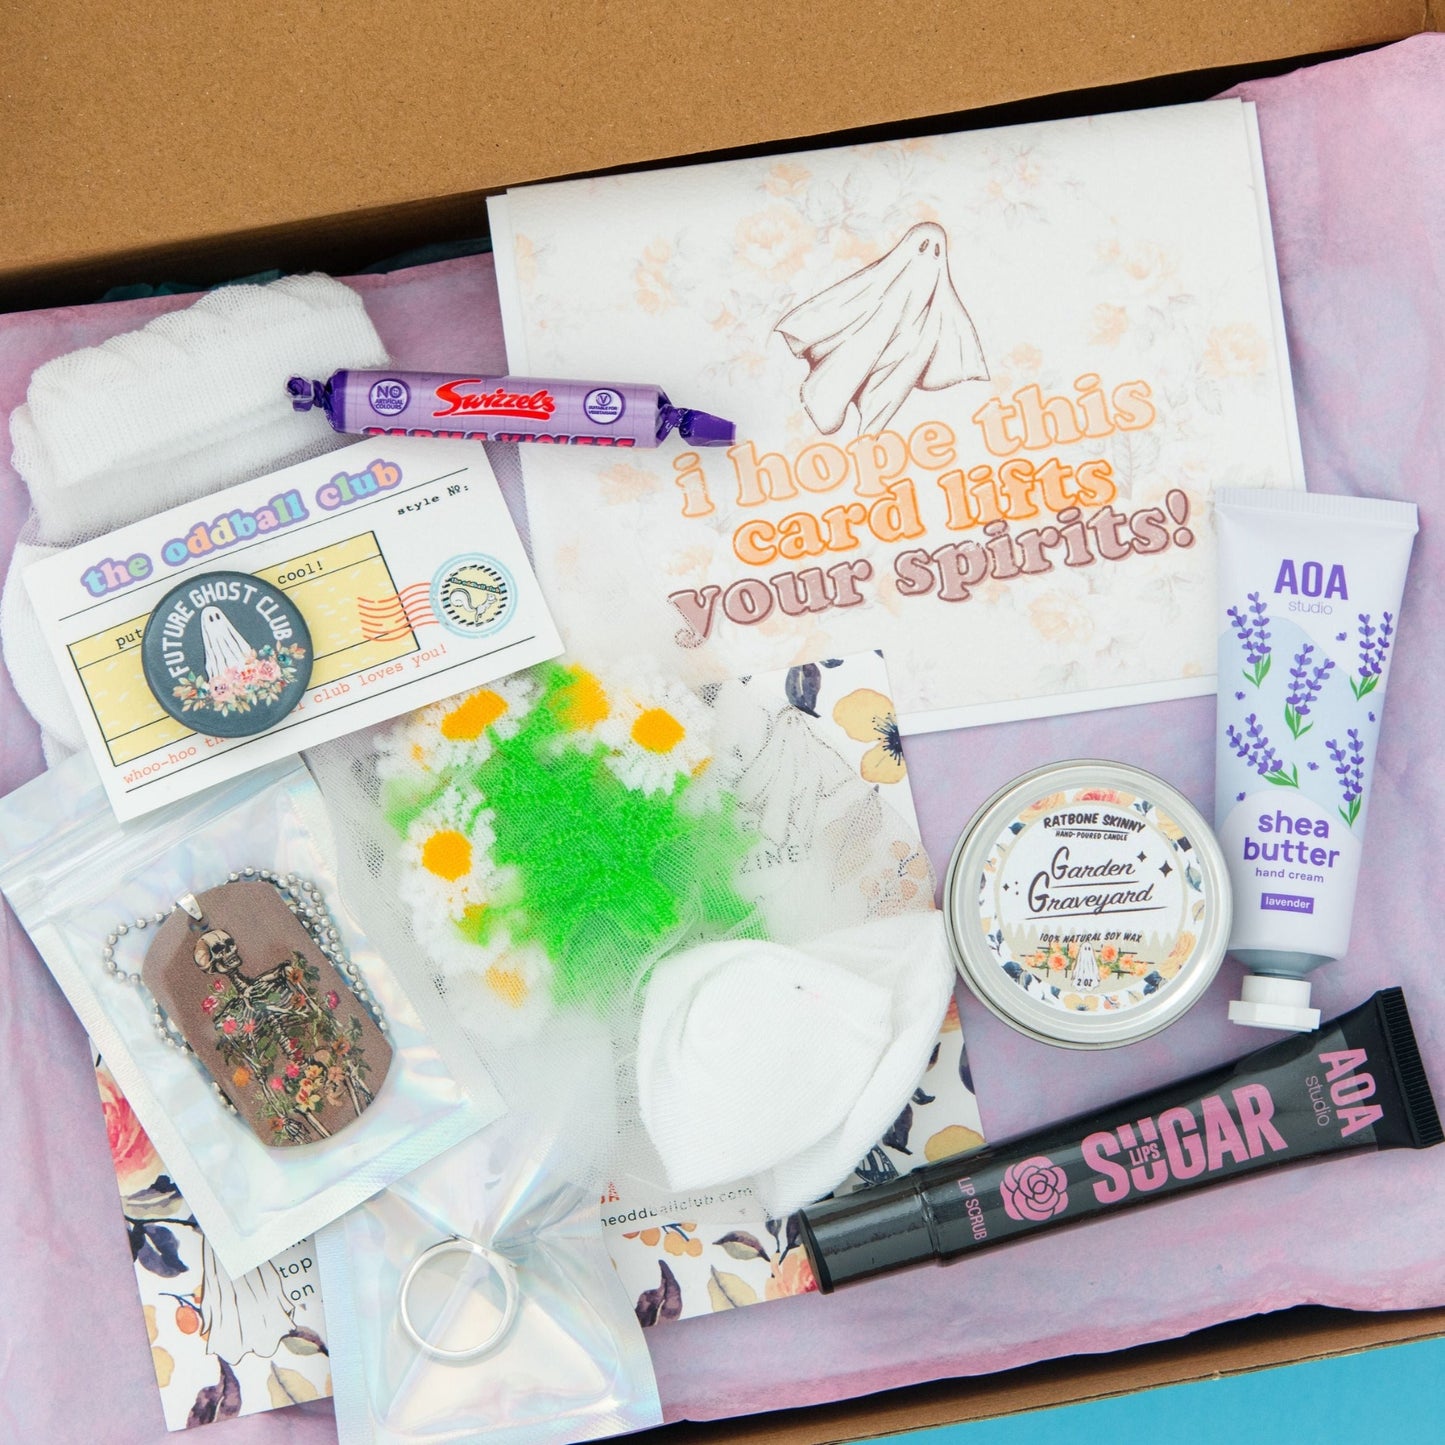 Unbox a spooky surprise with our ghost-themed subscription box. This set includes a ghost greeting card, sugar lip scrub, a future ghost pin, and a floral skeleton necklace. Also included are a mini candle, tube of hand lotion, a ring, and sheer daisy flower socks. All nestled in purple tissue paper with a floral background, this Halloween box is the perfect treat for any ghost lover.